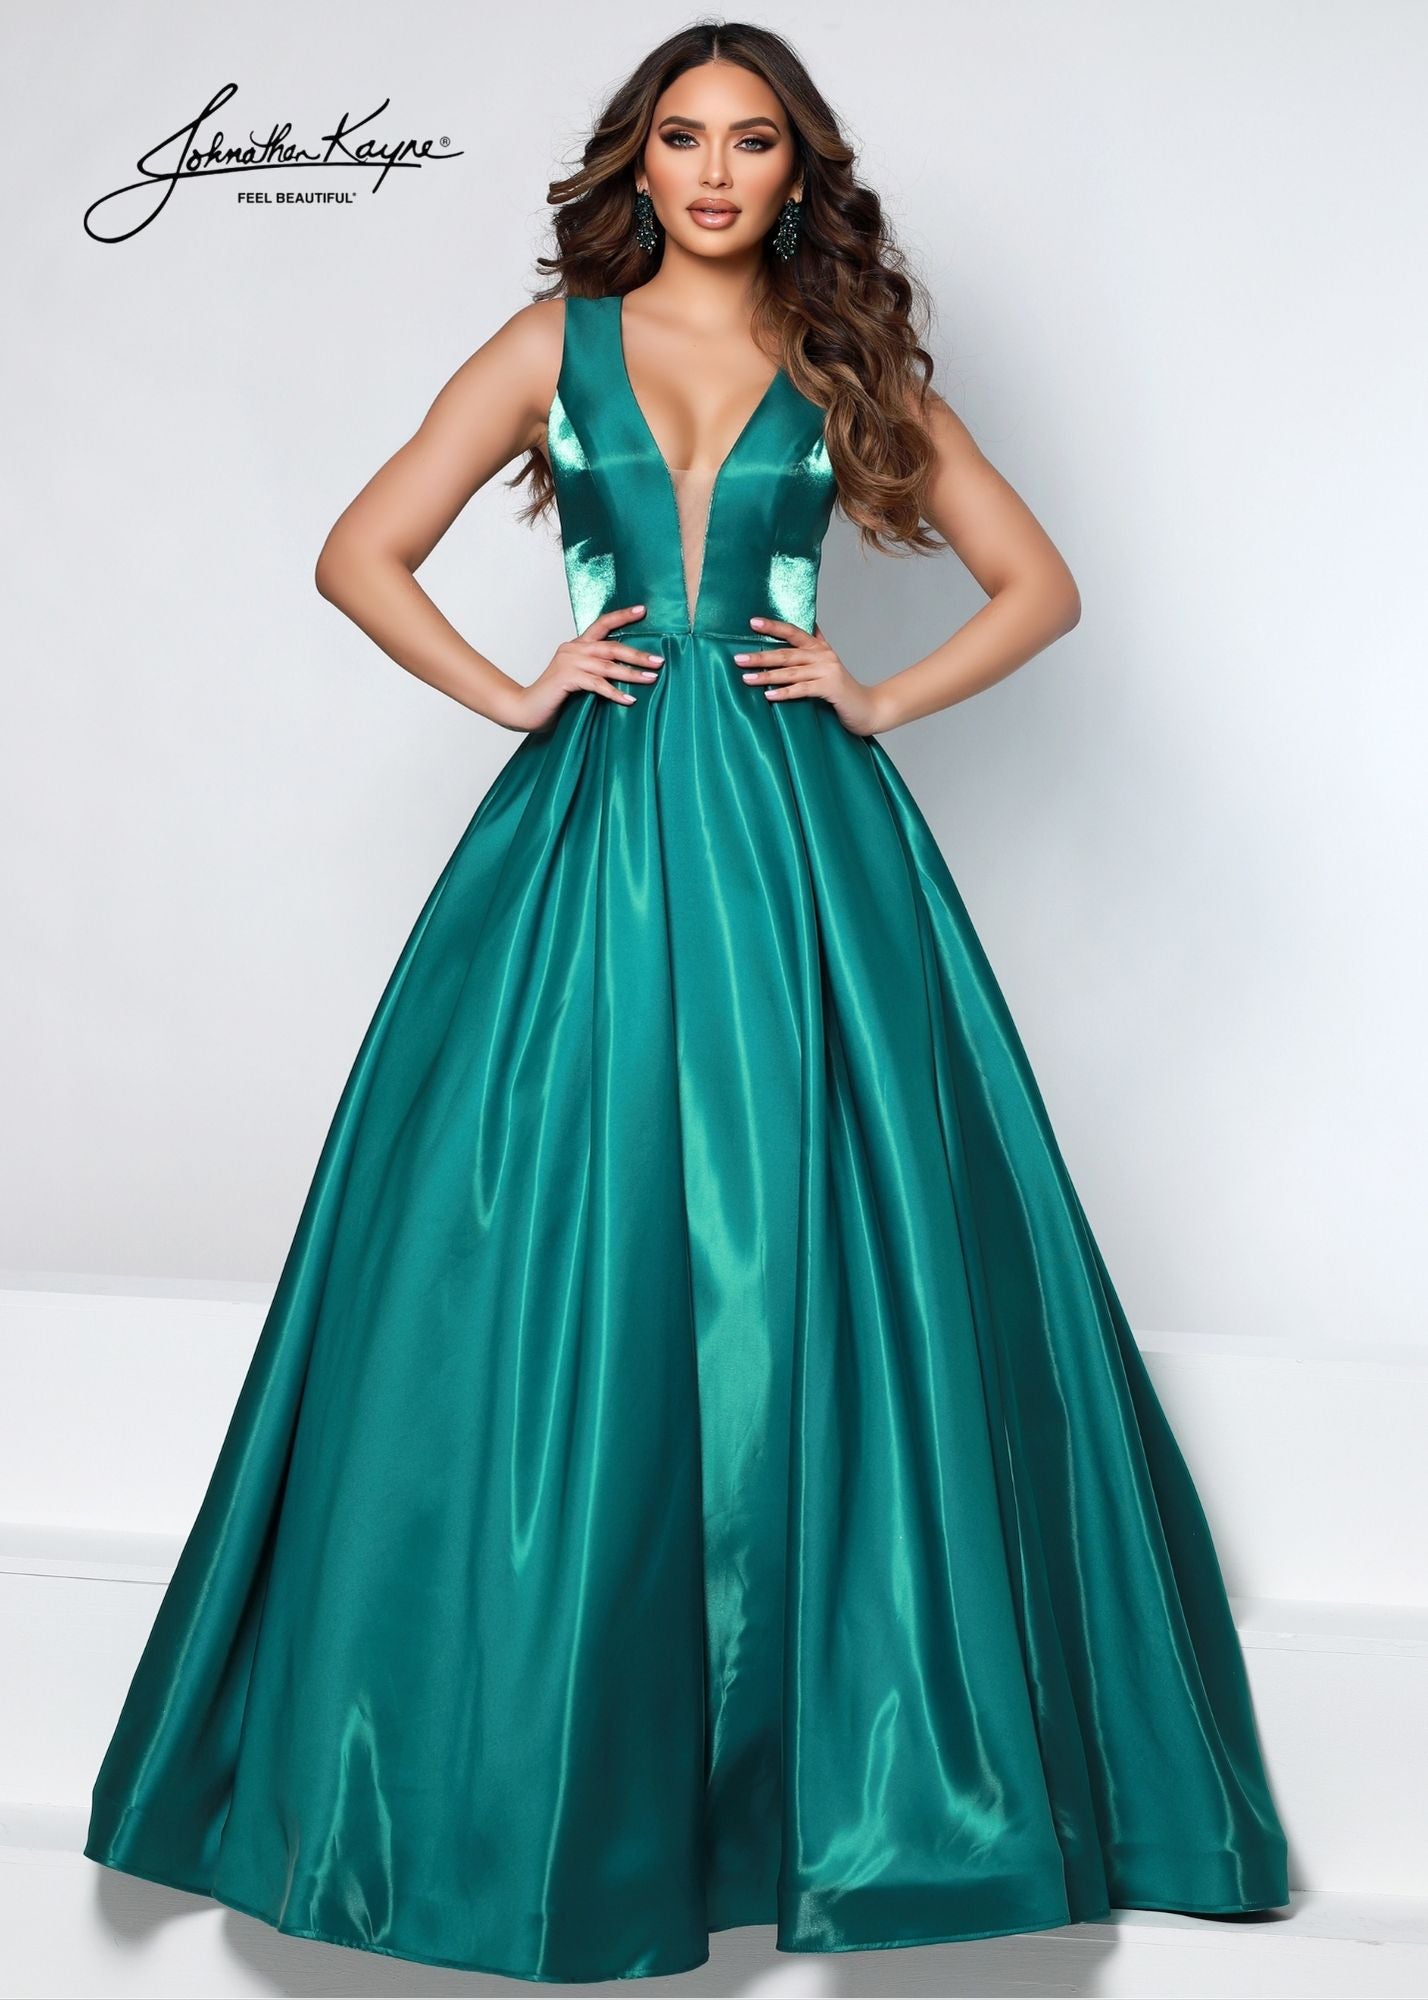 Johnathan Kayne 2550 Size 4 Royal A-Line Ballgown Satin Plunging Neckline Side Cut Outs Bows In Back Prom Gown. This elegant Johnathan Kayne 2550 Prom Gown is crafted in Royal satin fabric and features a classic A-line silhouette. It boasts a plunging neckline, side cut-outs and bows in the back for a luxurious look. Size 4.